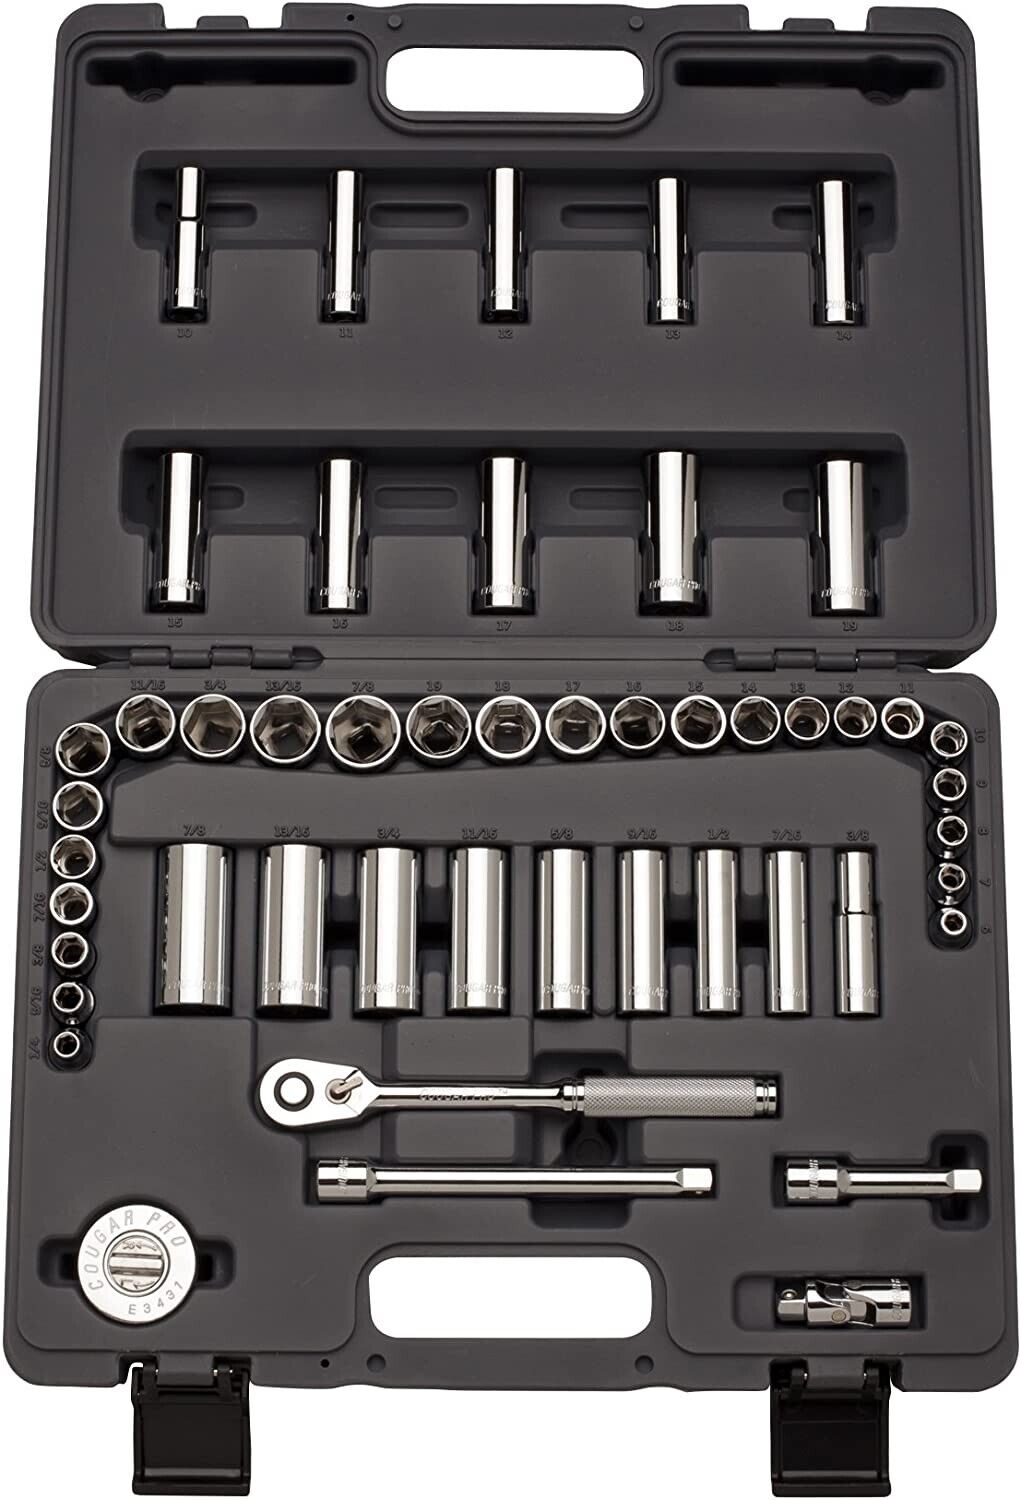 Cougar Pro Socket Wrench Box Set 46 Pieces 1/4" Drive Metric/SAE A29